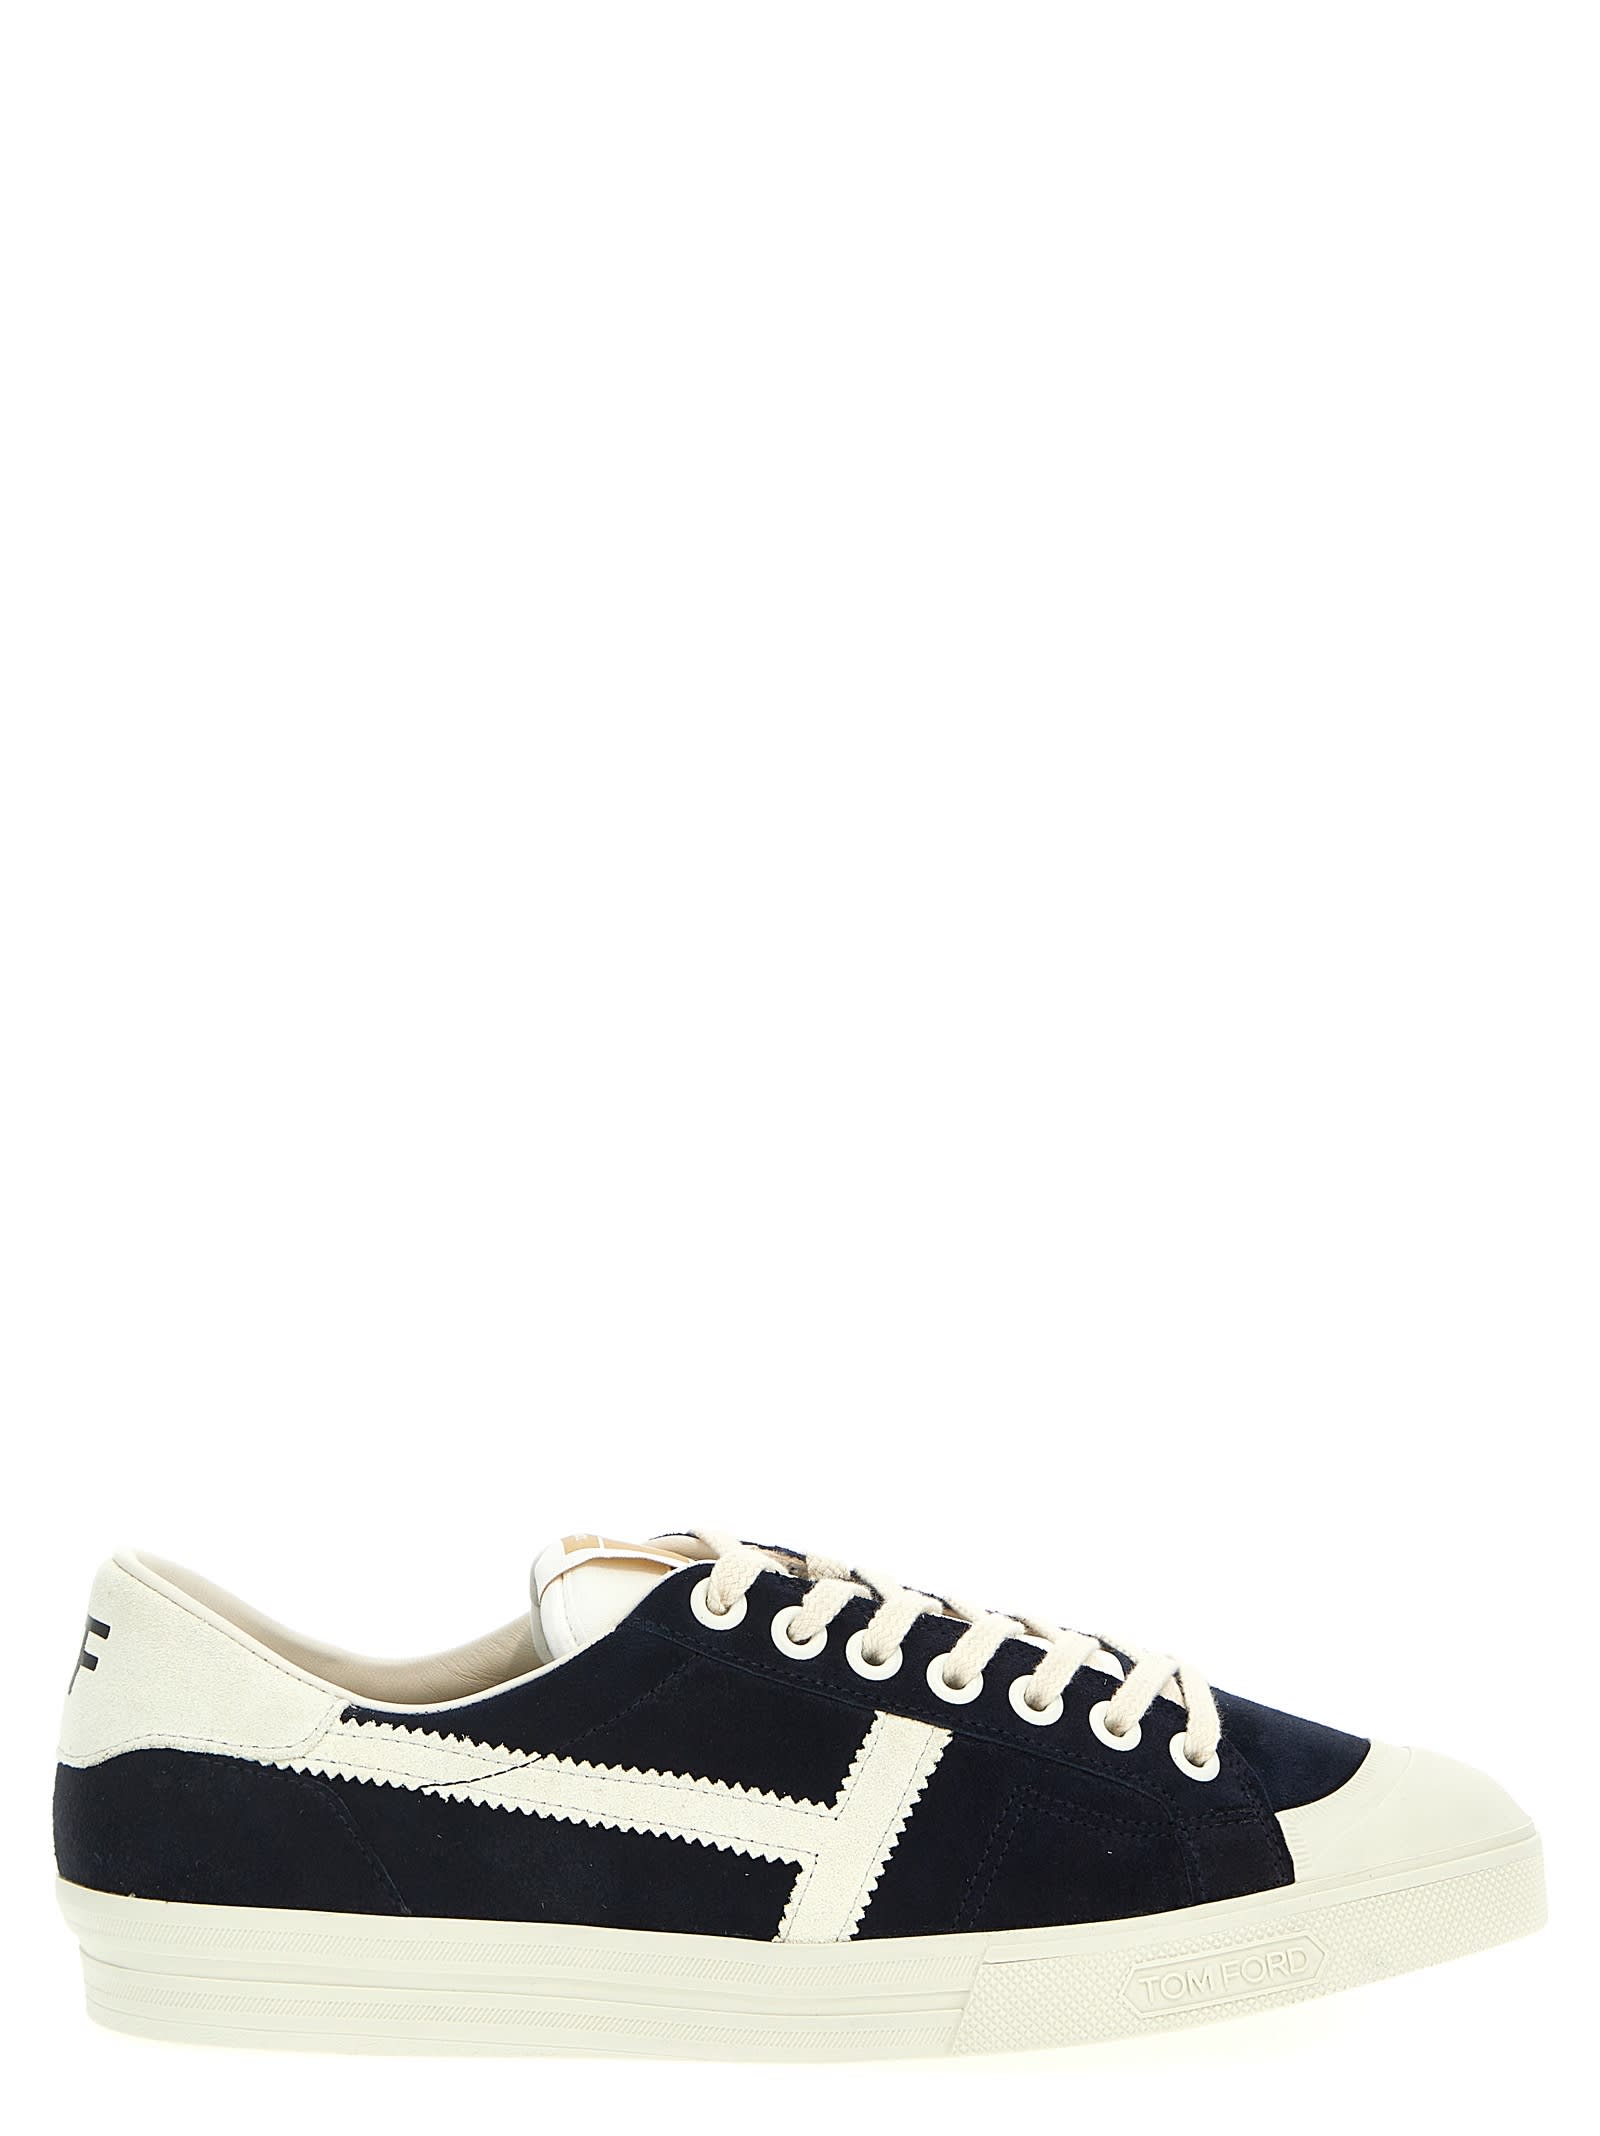 TOM FORD SUEDE SNEAKERS